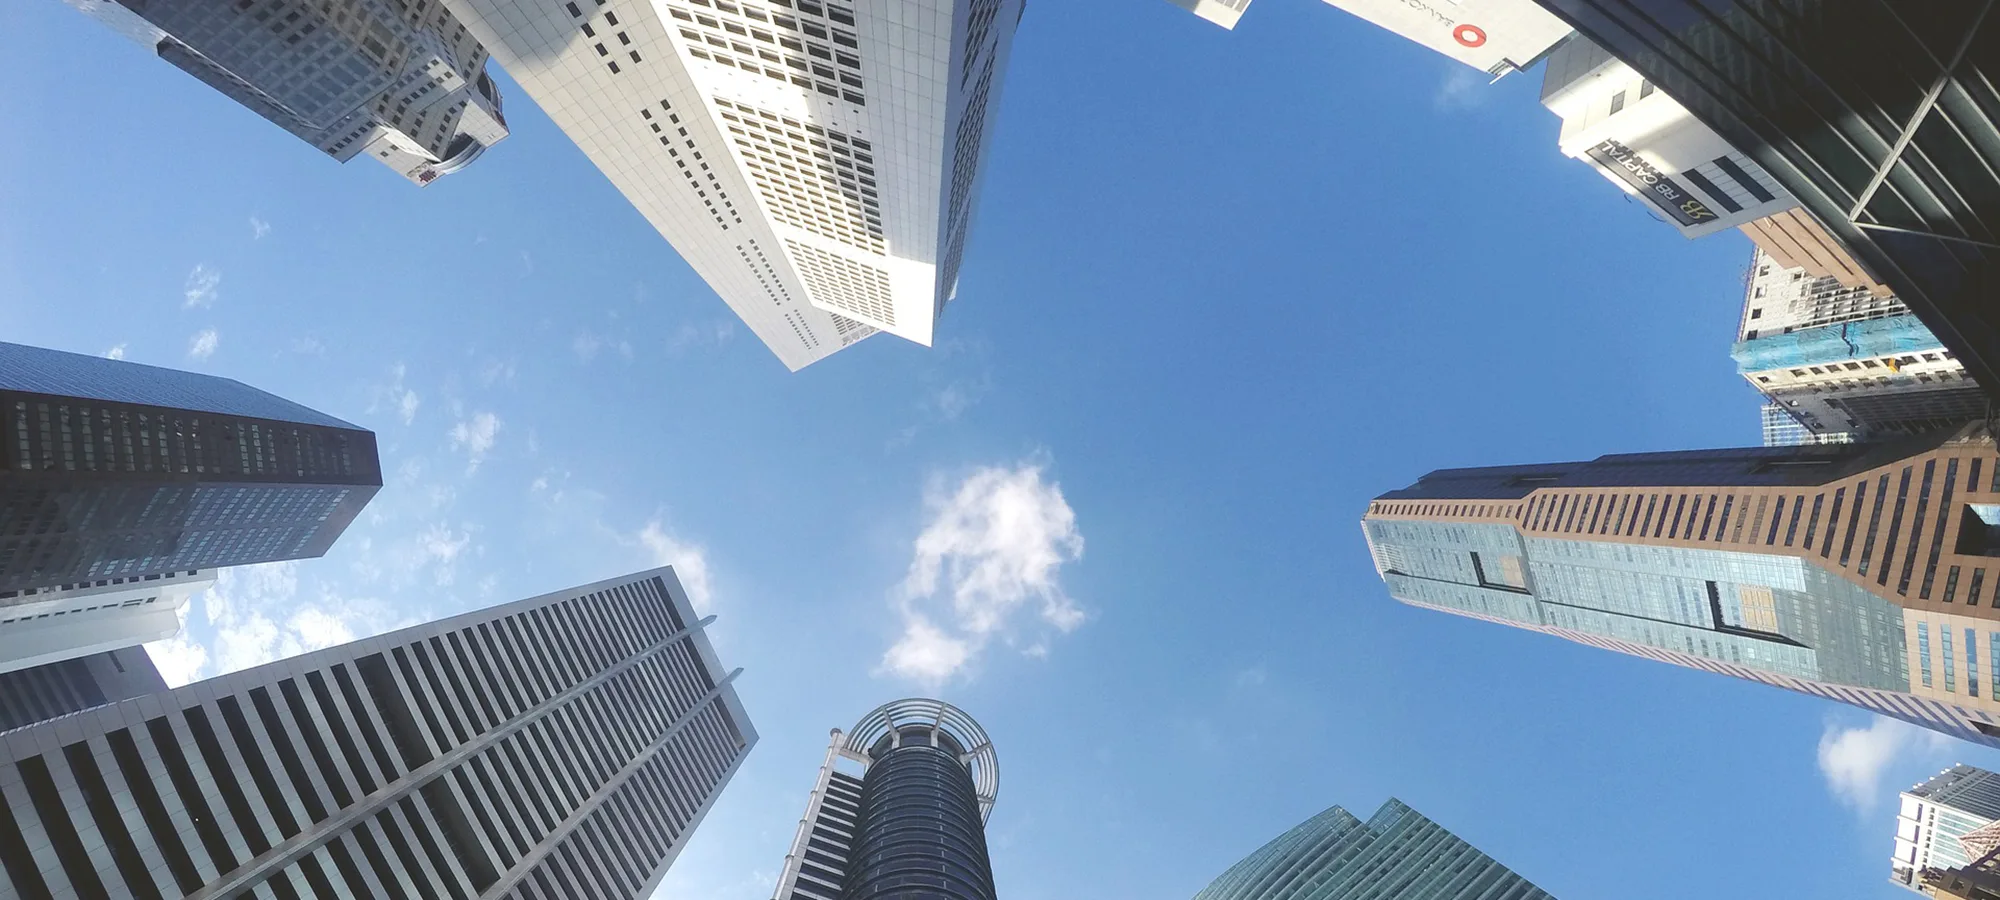 a worm's eye view of office buildings and the sky